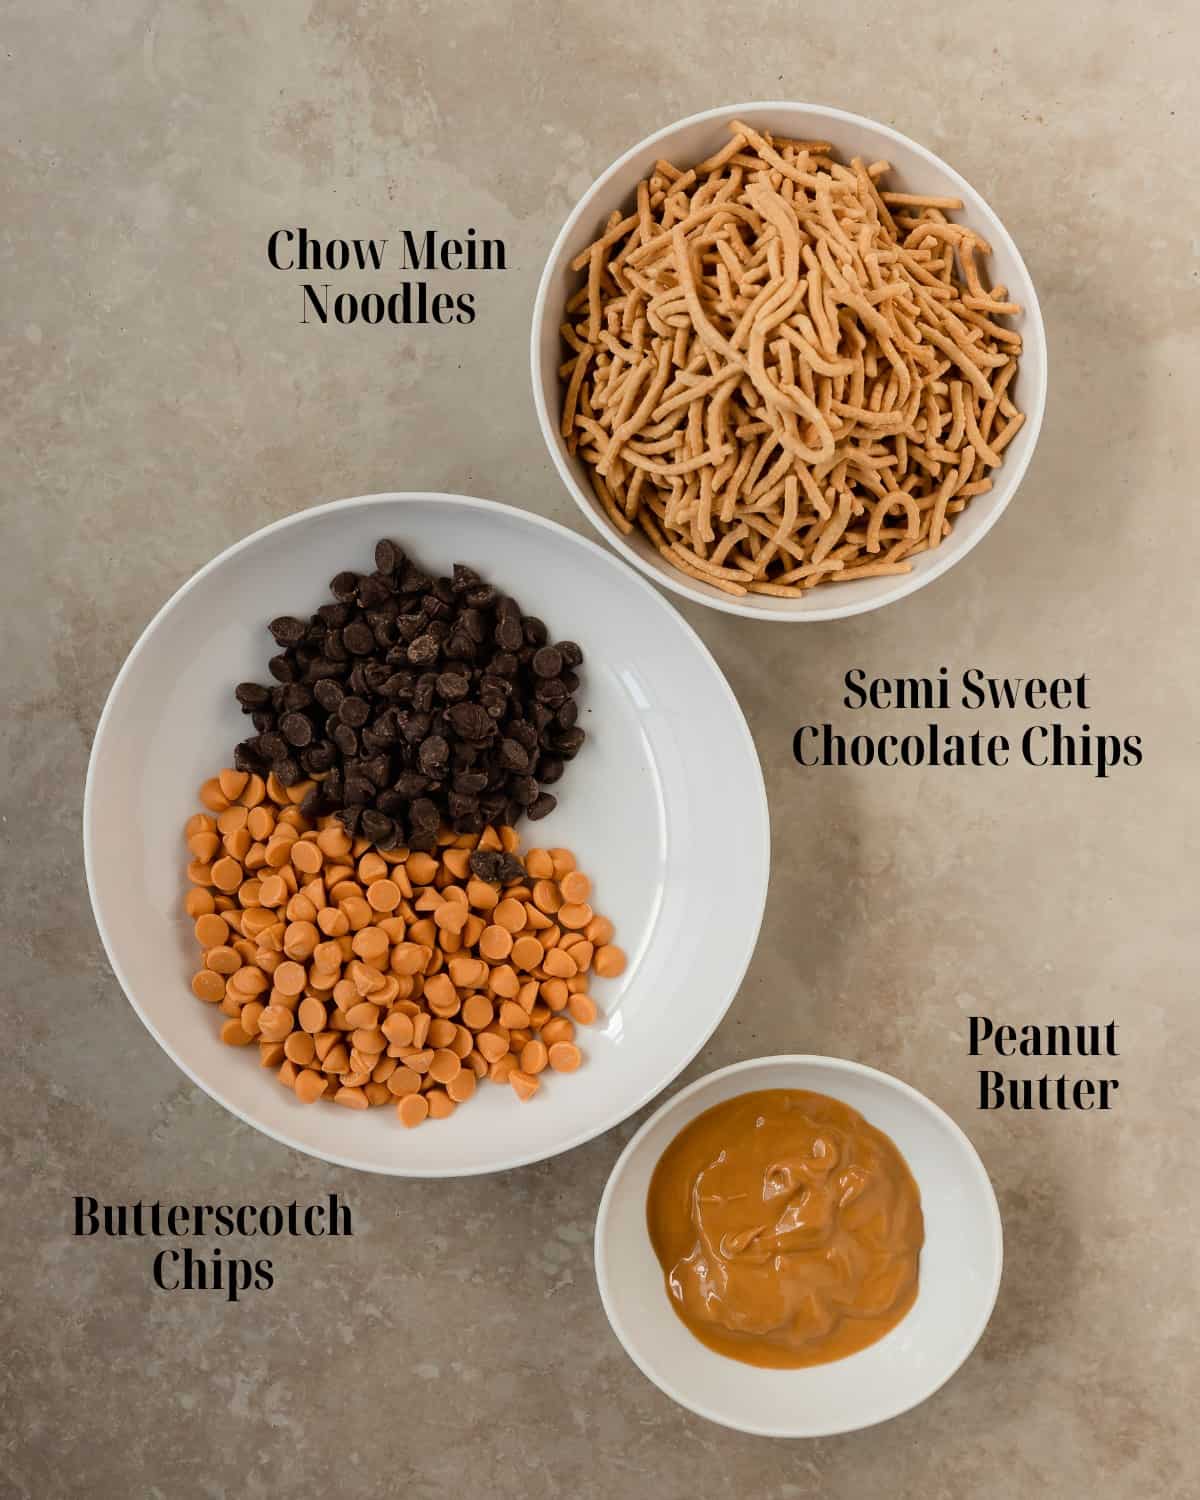 Gather butterscotch chips, semi sweet chocolate chips, chow mein noodles and peanut butter. 